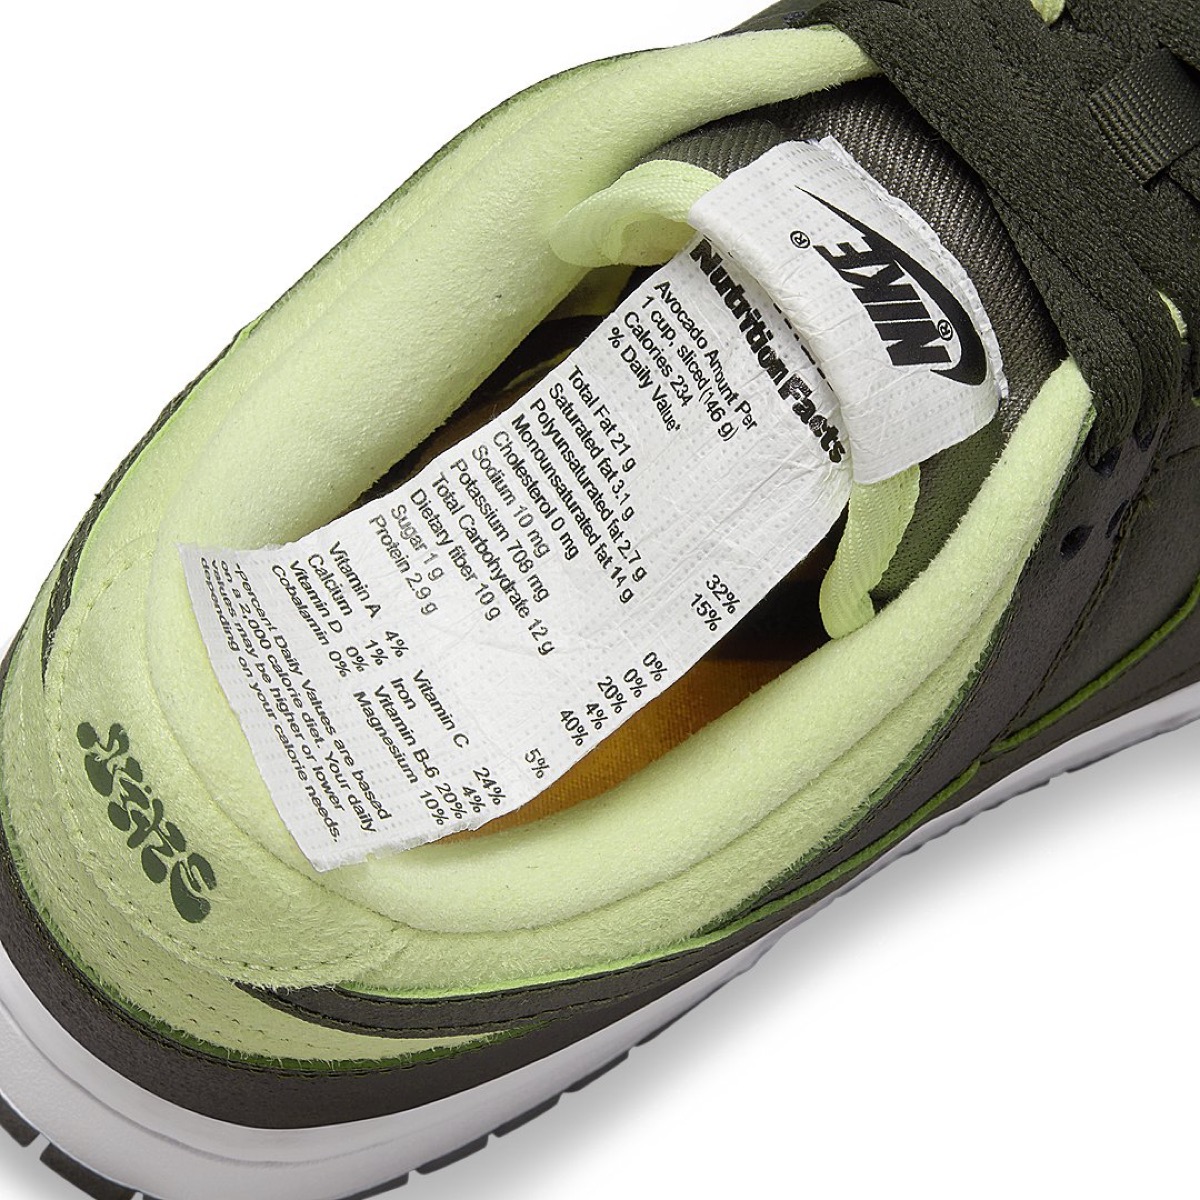 Nike Wmns Dunk Low LX “Avocado”が国内5月28日に発売予定 | UP TO DATE